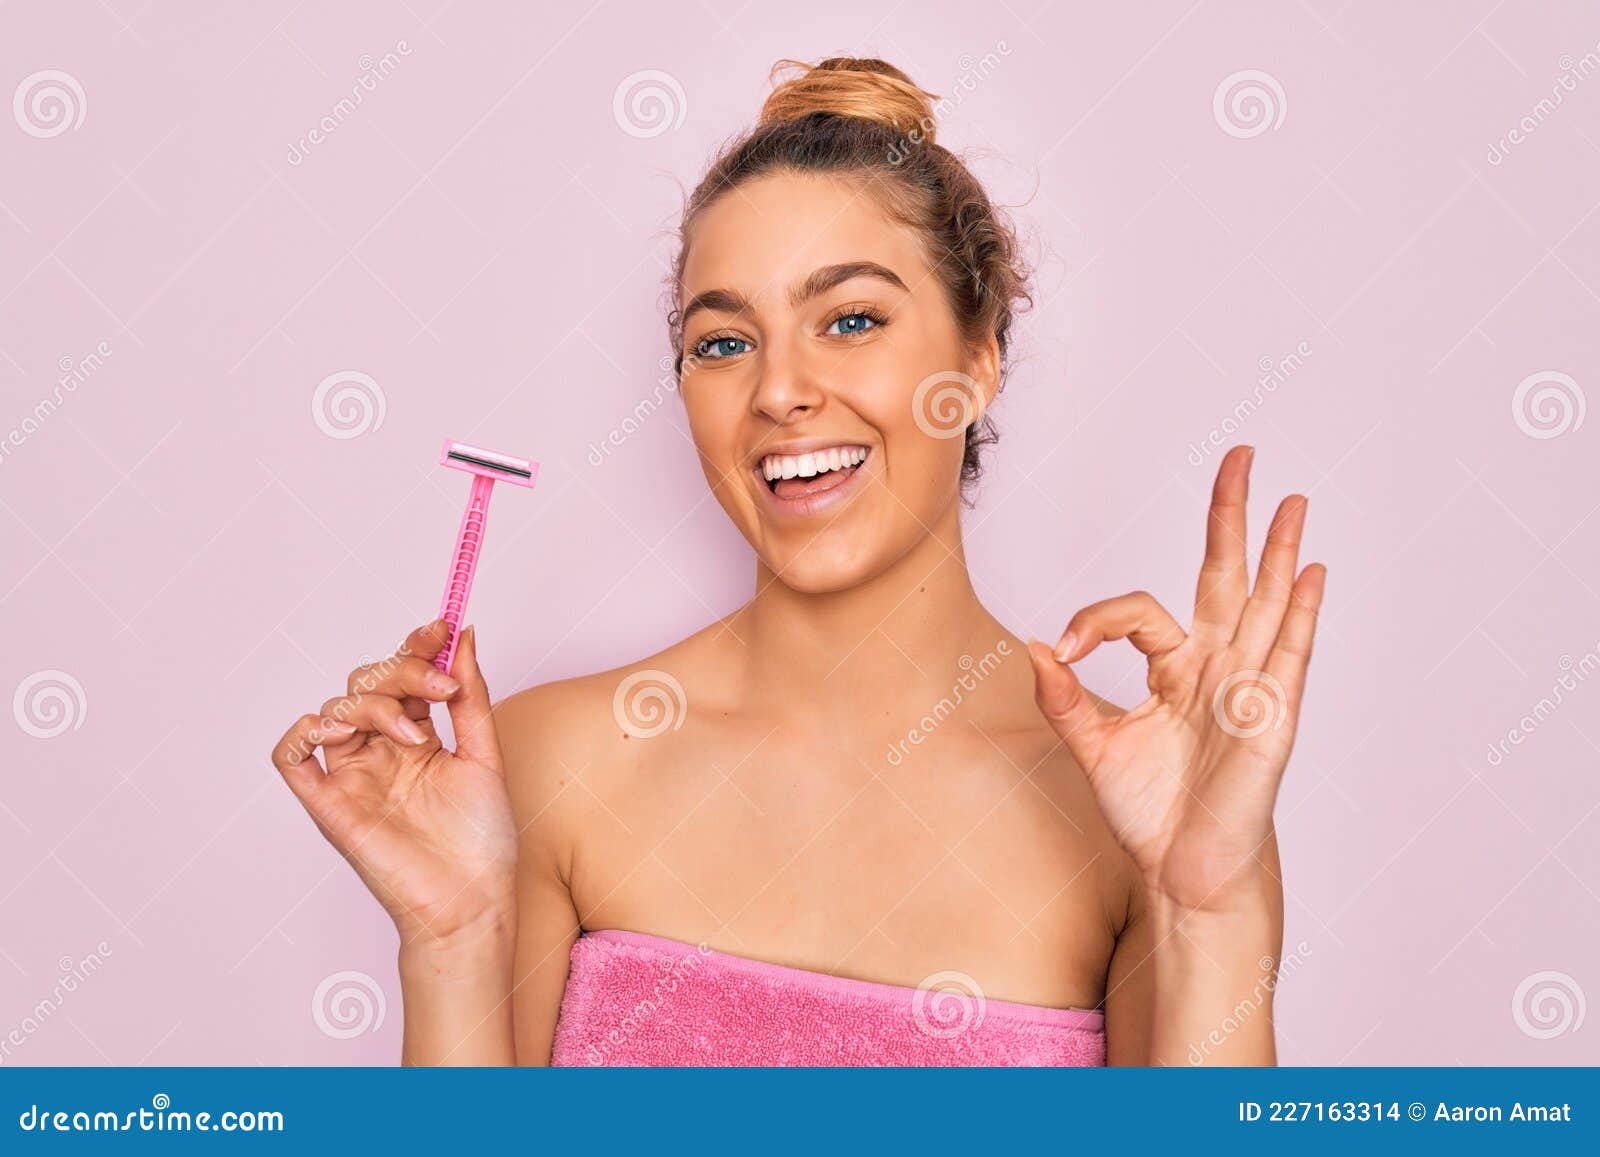 beautiful woman with blue eyes wearing towel shower after bath holding depilation razon doing ok sign with fingers, excellent